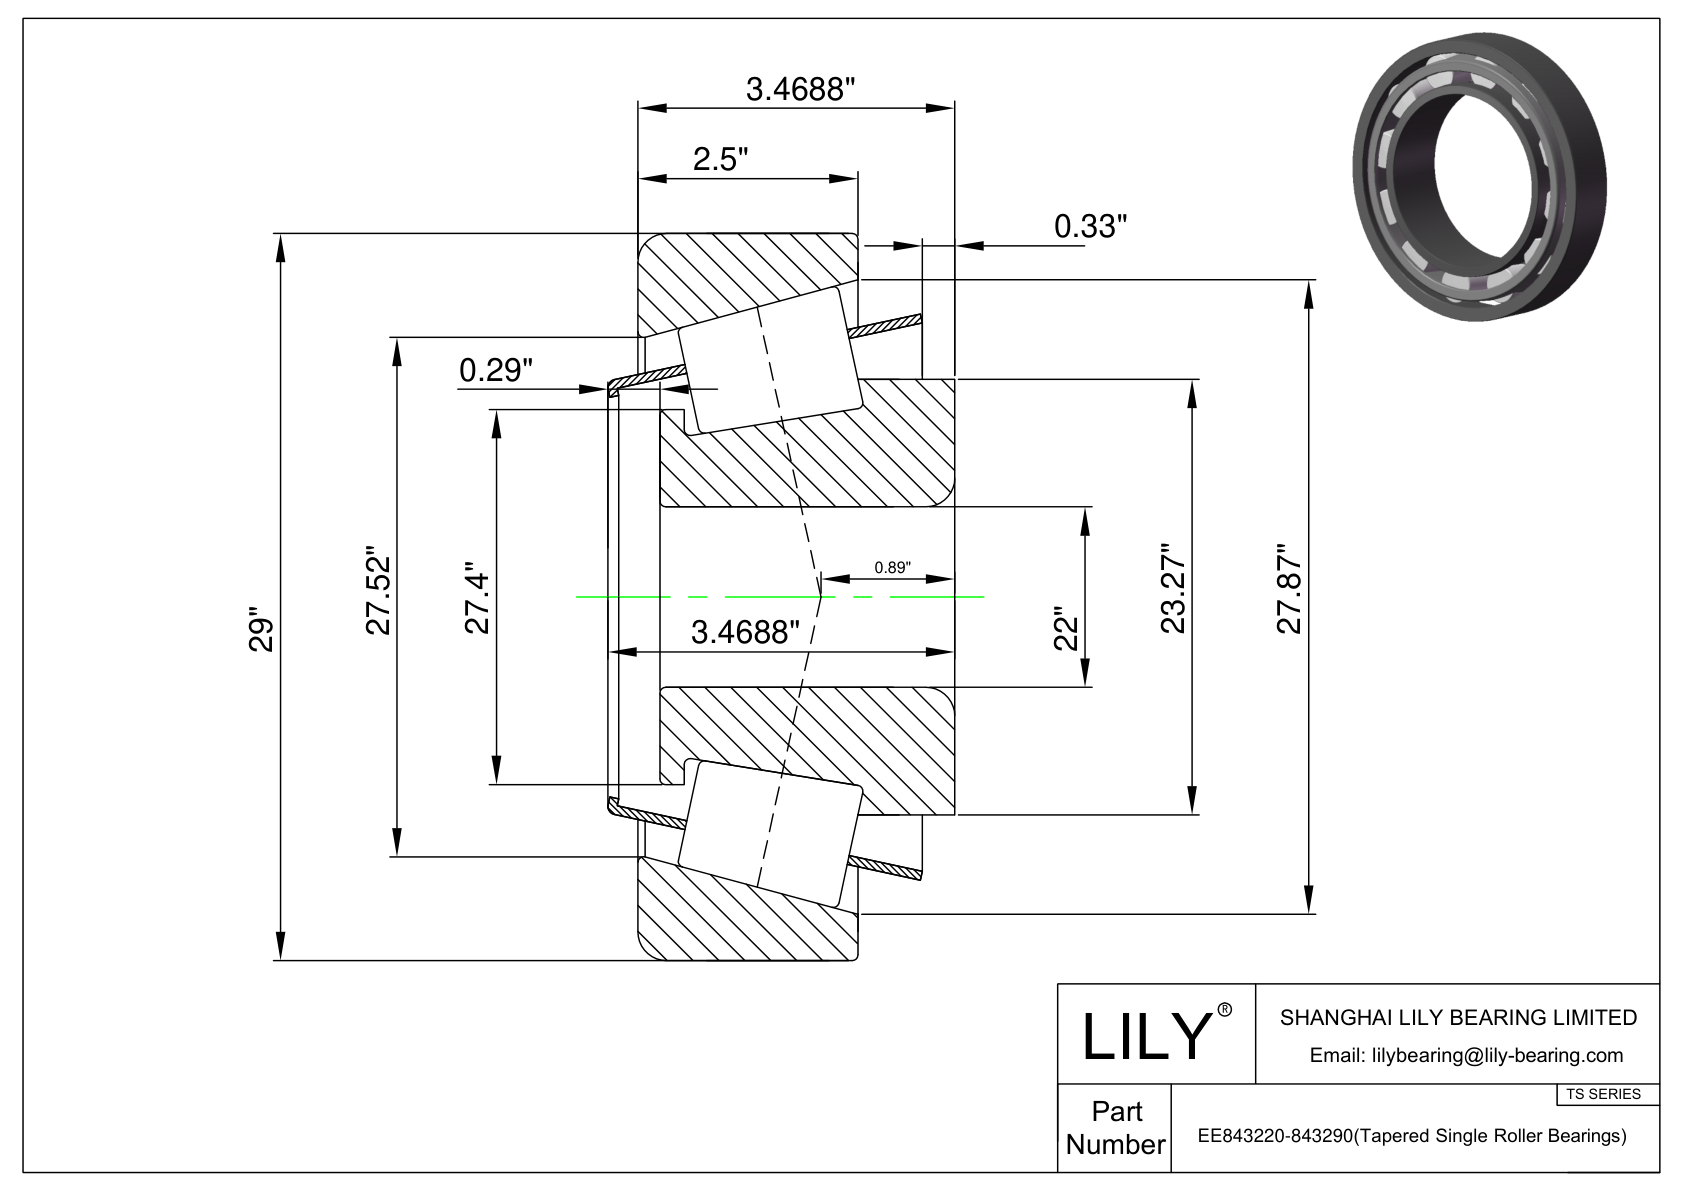 EE843220-843290 TS (Tapered Single Roller Bearings) (Imperial) cad drawing